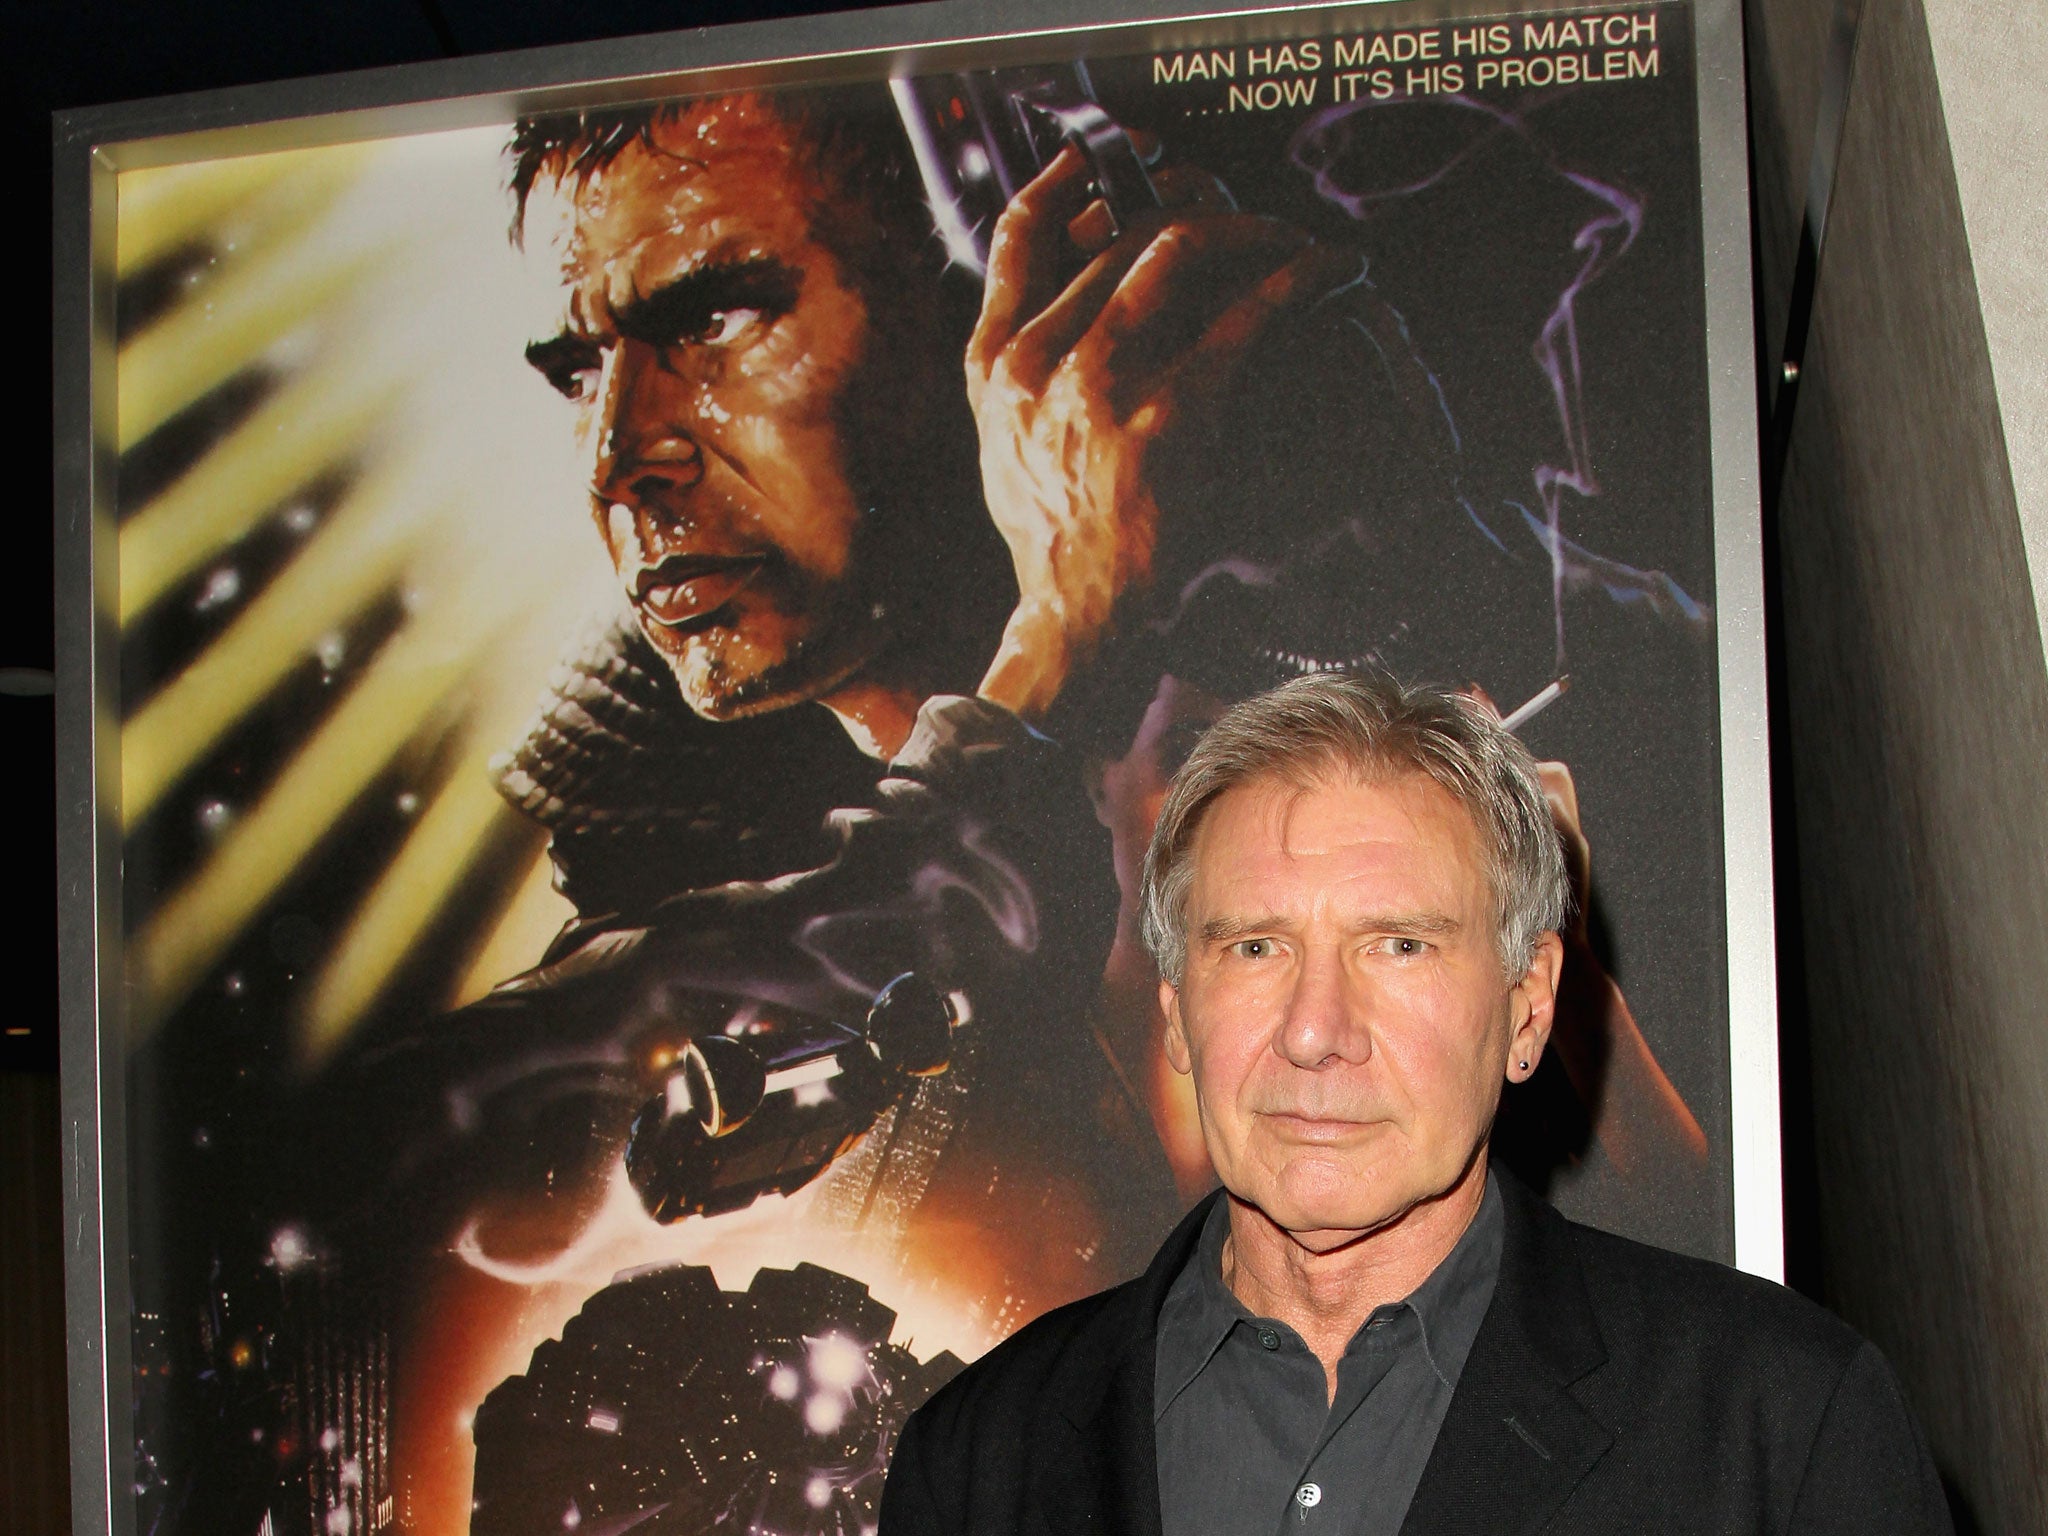 Harrison Ford attends Blade Runner at Target Presents AFI's Night at the Movies at ArcLight Cinemas on 24 April, 2013 in Hollywood, California